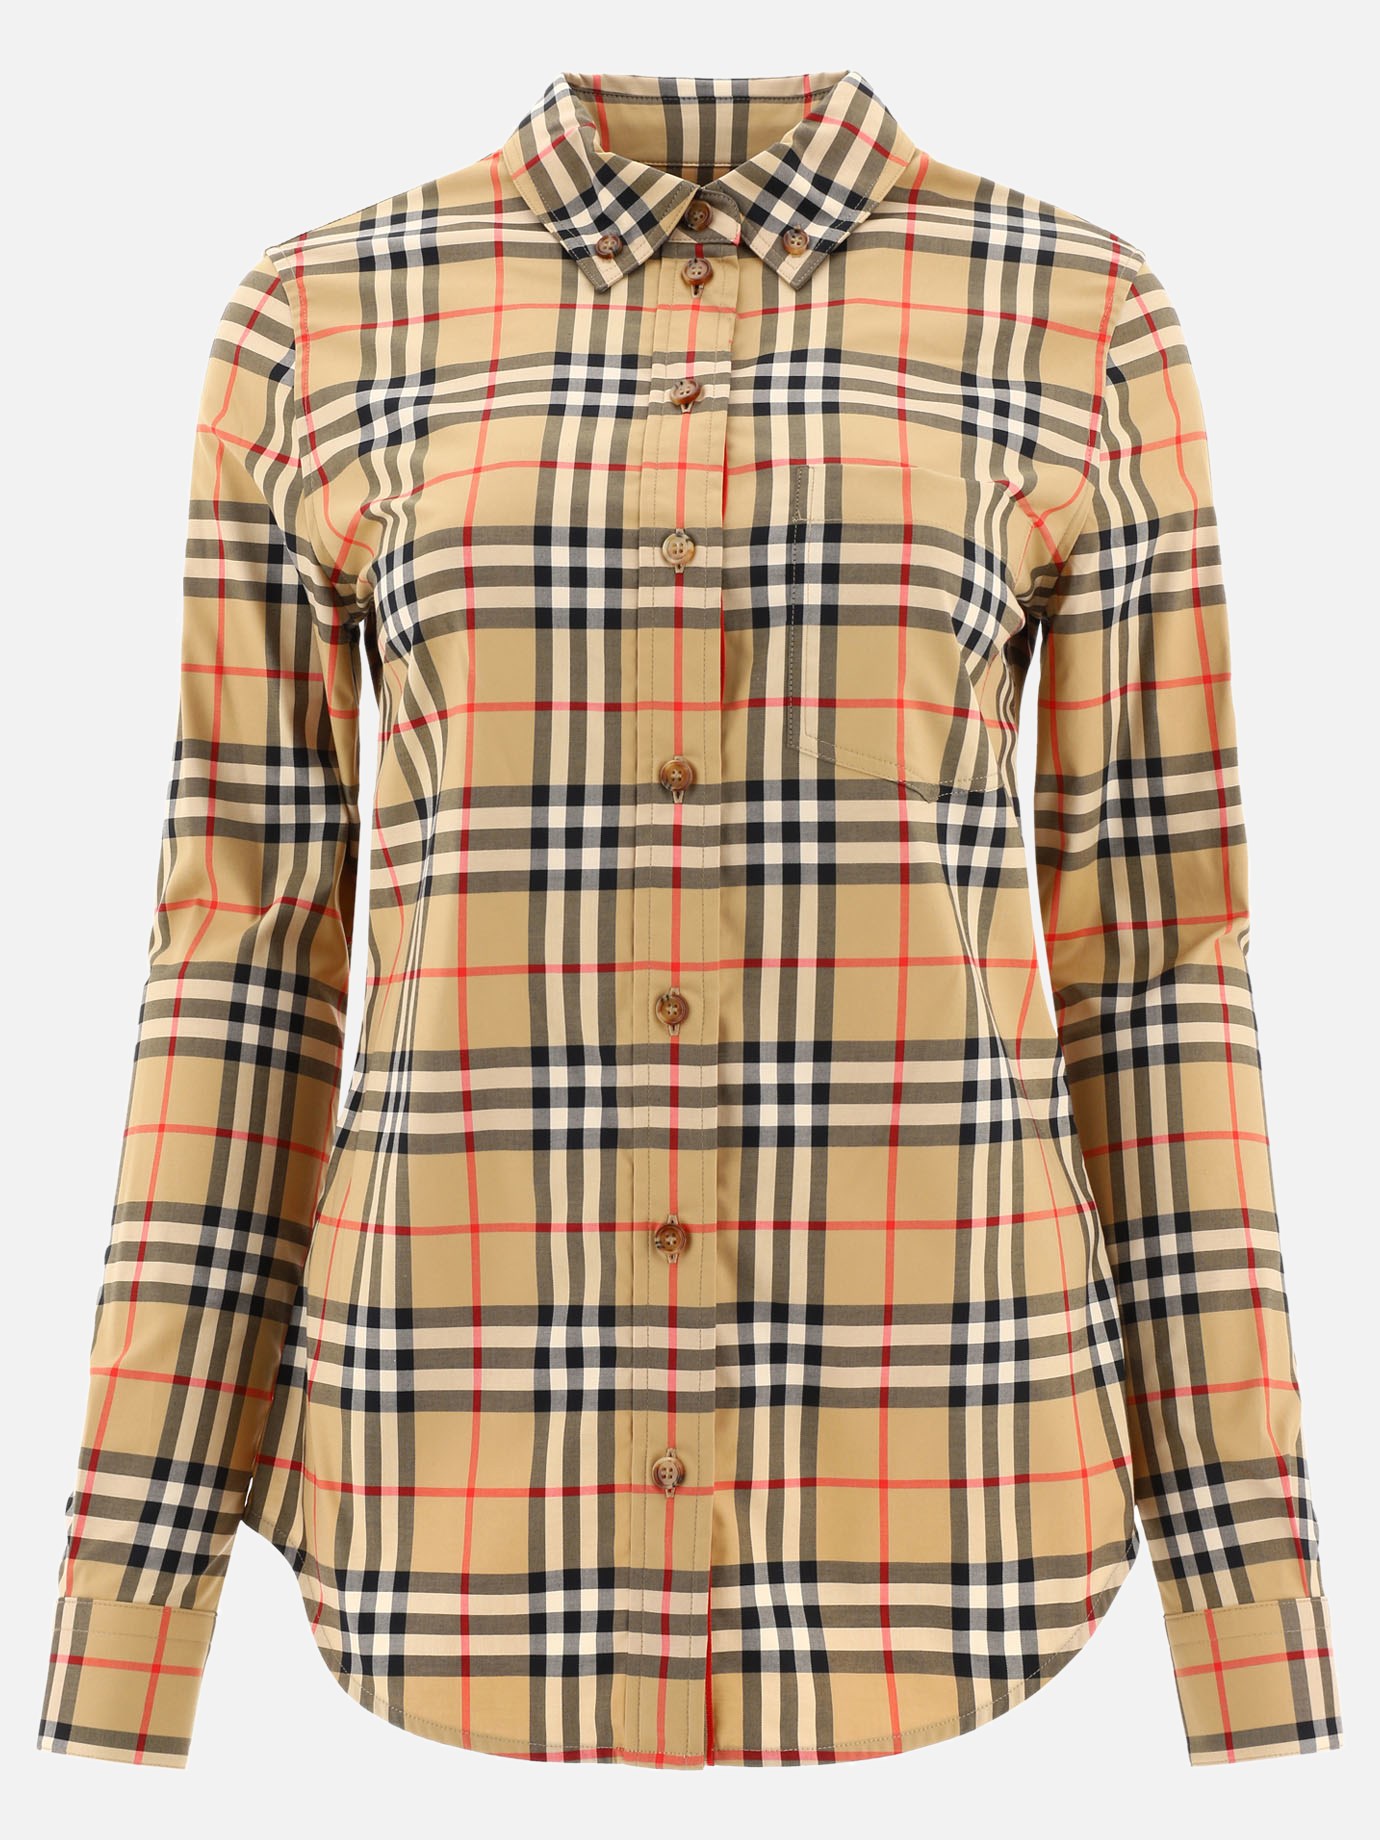  Lapwing  shirtby Burberry - 3